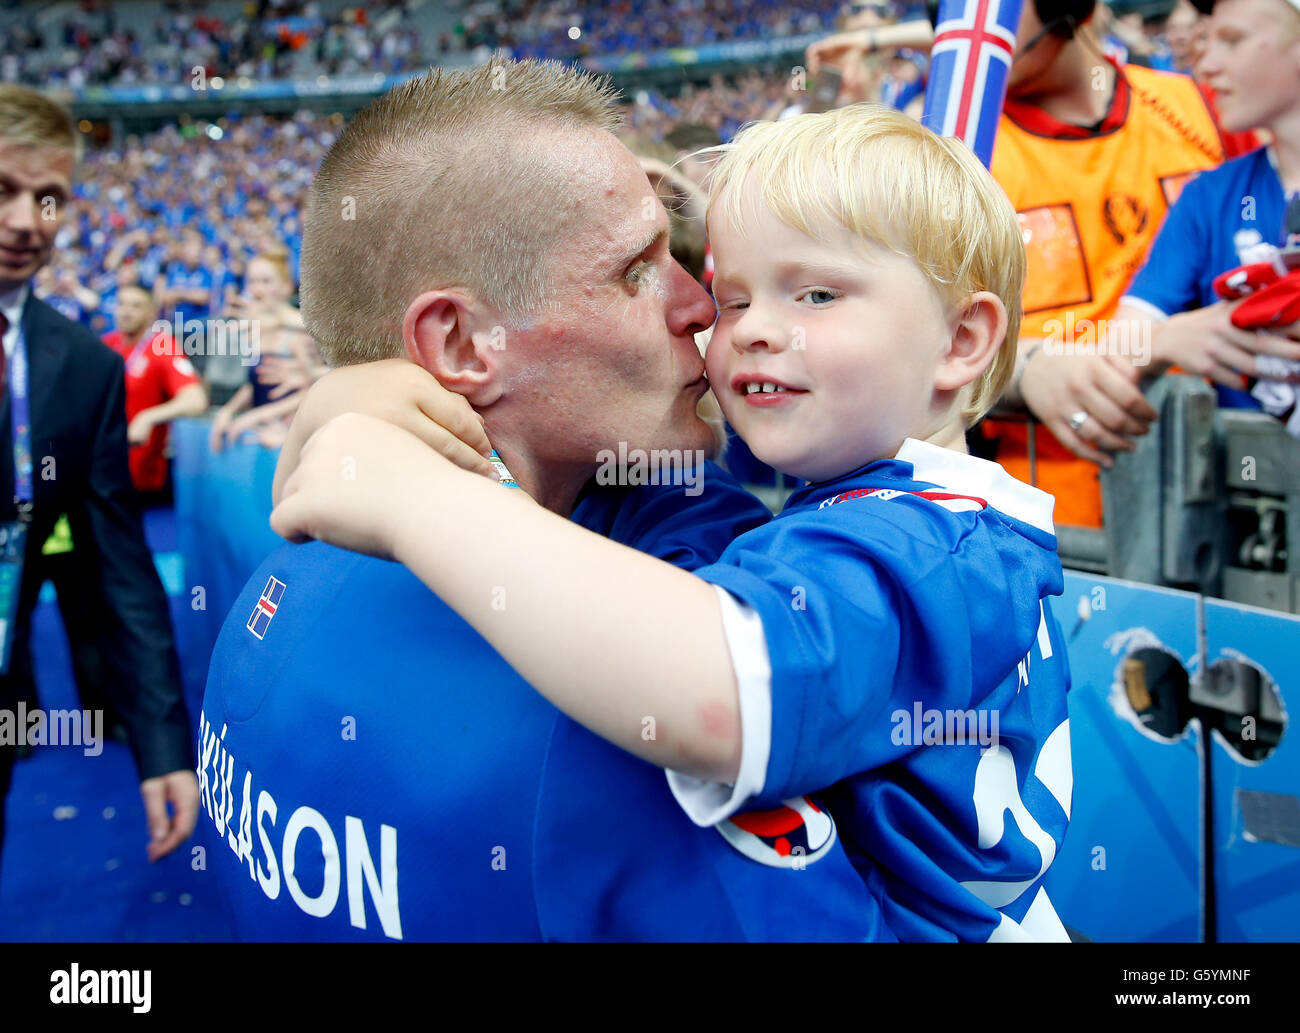 Iceland's Ari Freyr Skulason celebrates qualifying for the last 16 round with his Son after the Euro 2016, Group F match at the Stade de France, Paris. PRESS ASSOCIATION Photo. Picture date: Wednesday June 22, 2016. See PA story soccer Iceland. Photo credit should read: Owen Humphreys/PA Wire. RESTRICTIONS: Use subject to restrictions. Editorial use only. Book and magazine sales permitted providing not solely devoted to any one team/player/match. No commercial use. Call +44 (0)1158 447447 for further information. Stock Photo